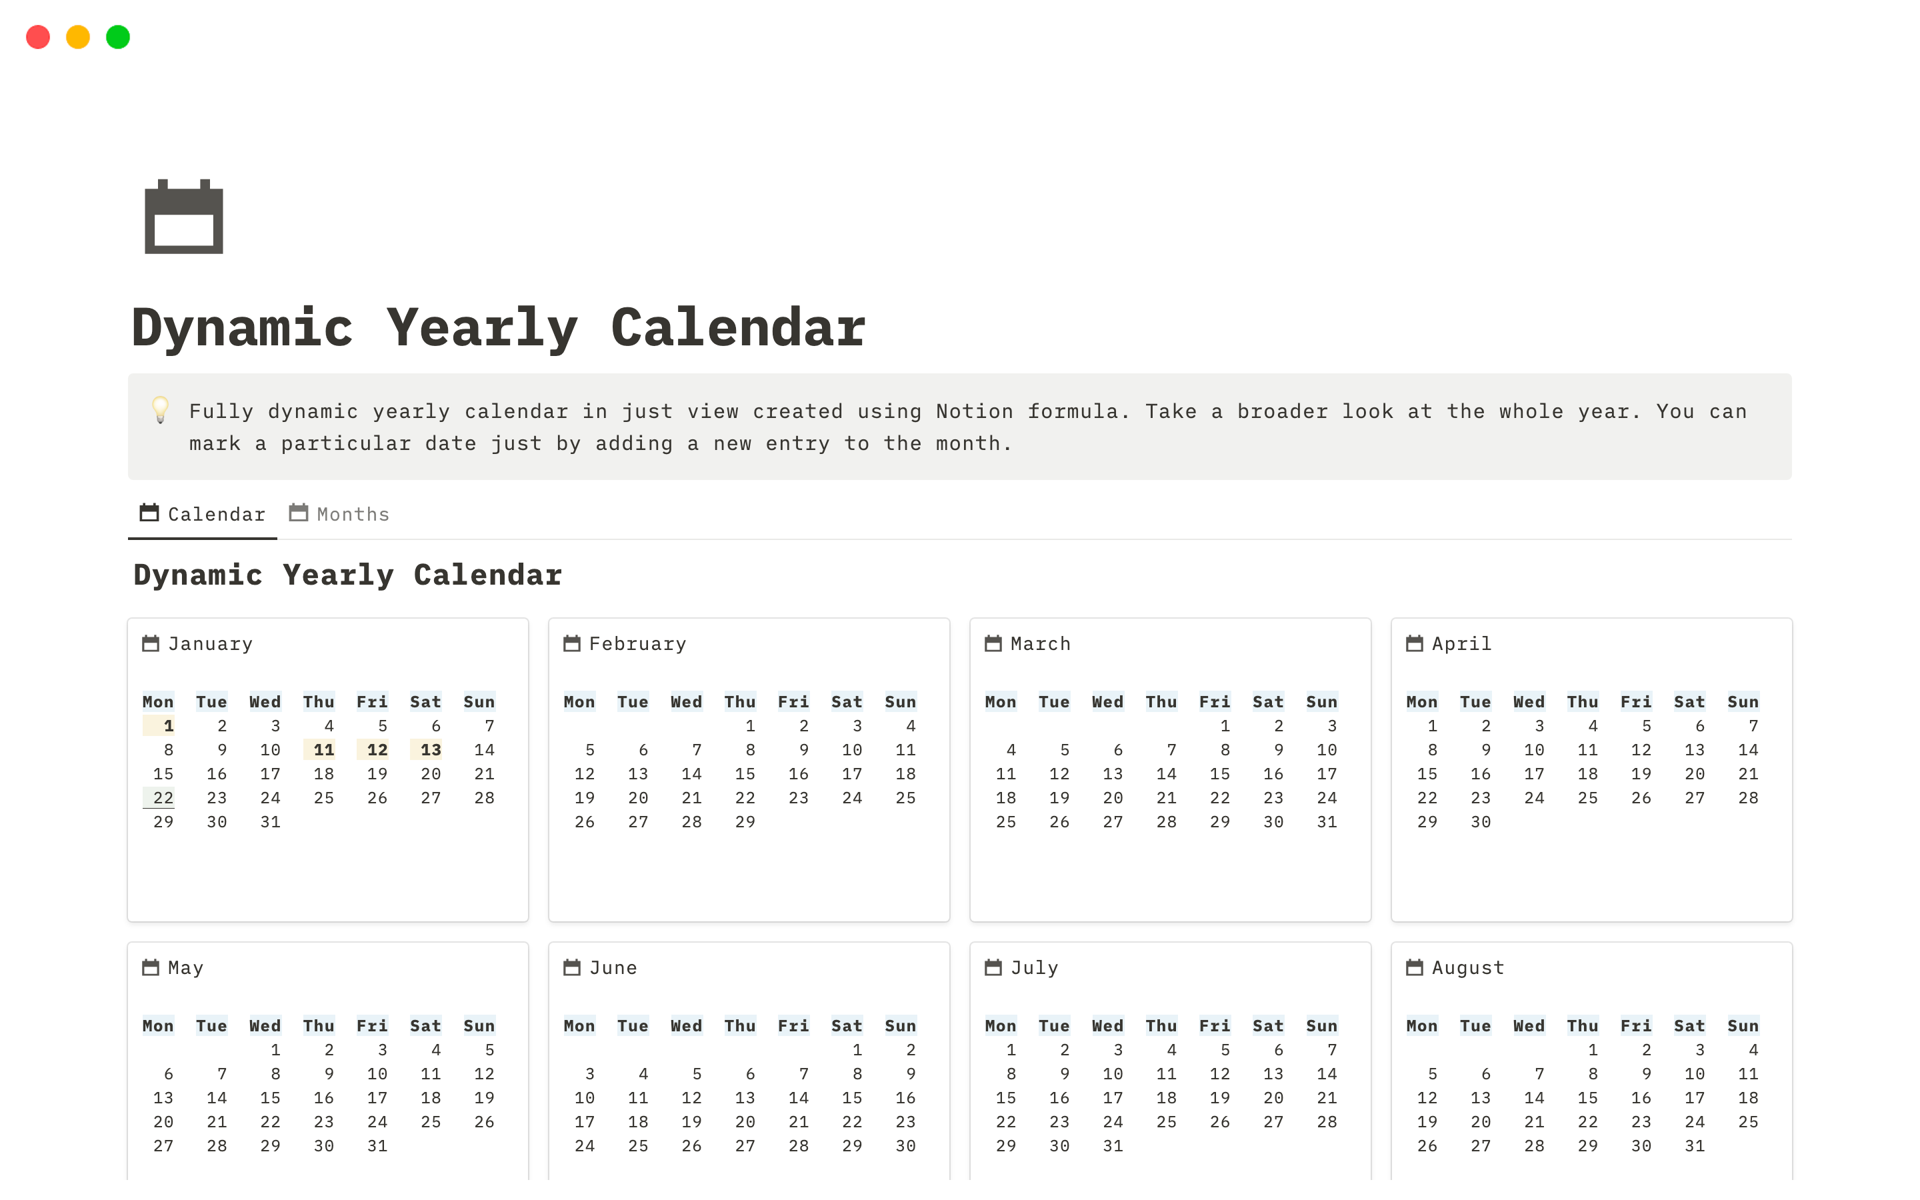 Fully dynamic yearly calendar in just view created using Notion formula. Take a broader look at the whole year. You can mark a particular date just by adding a new entry to the month.